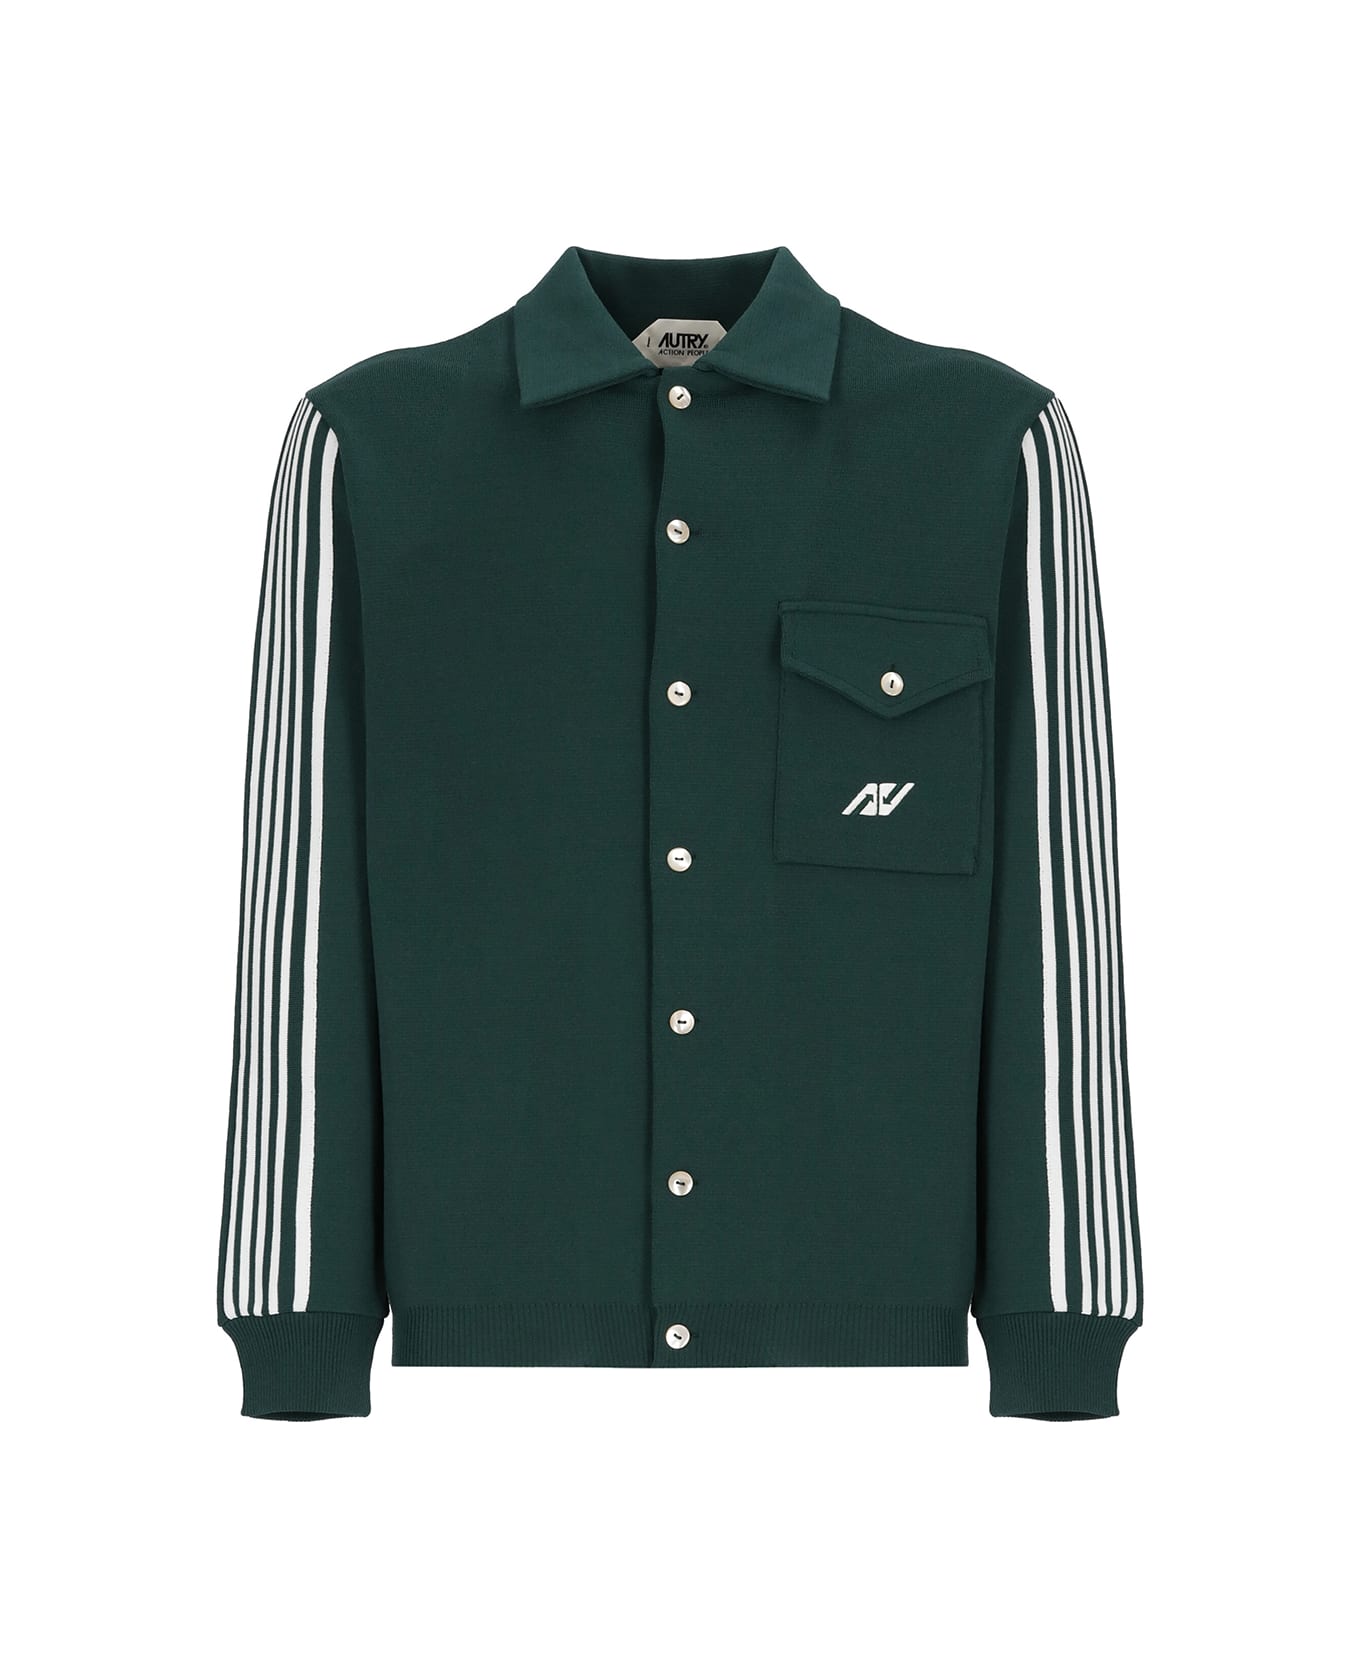 Autry Jacket Sporty Casual Jacket - Green